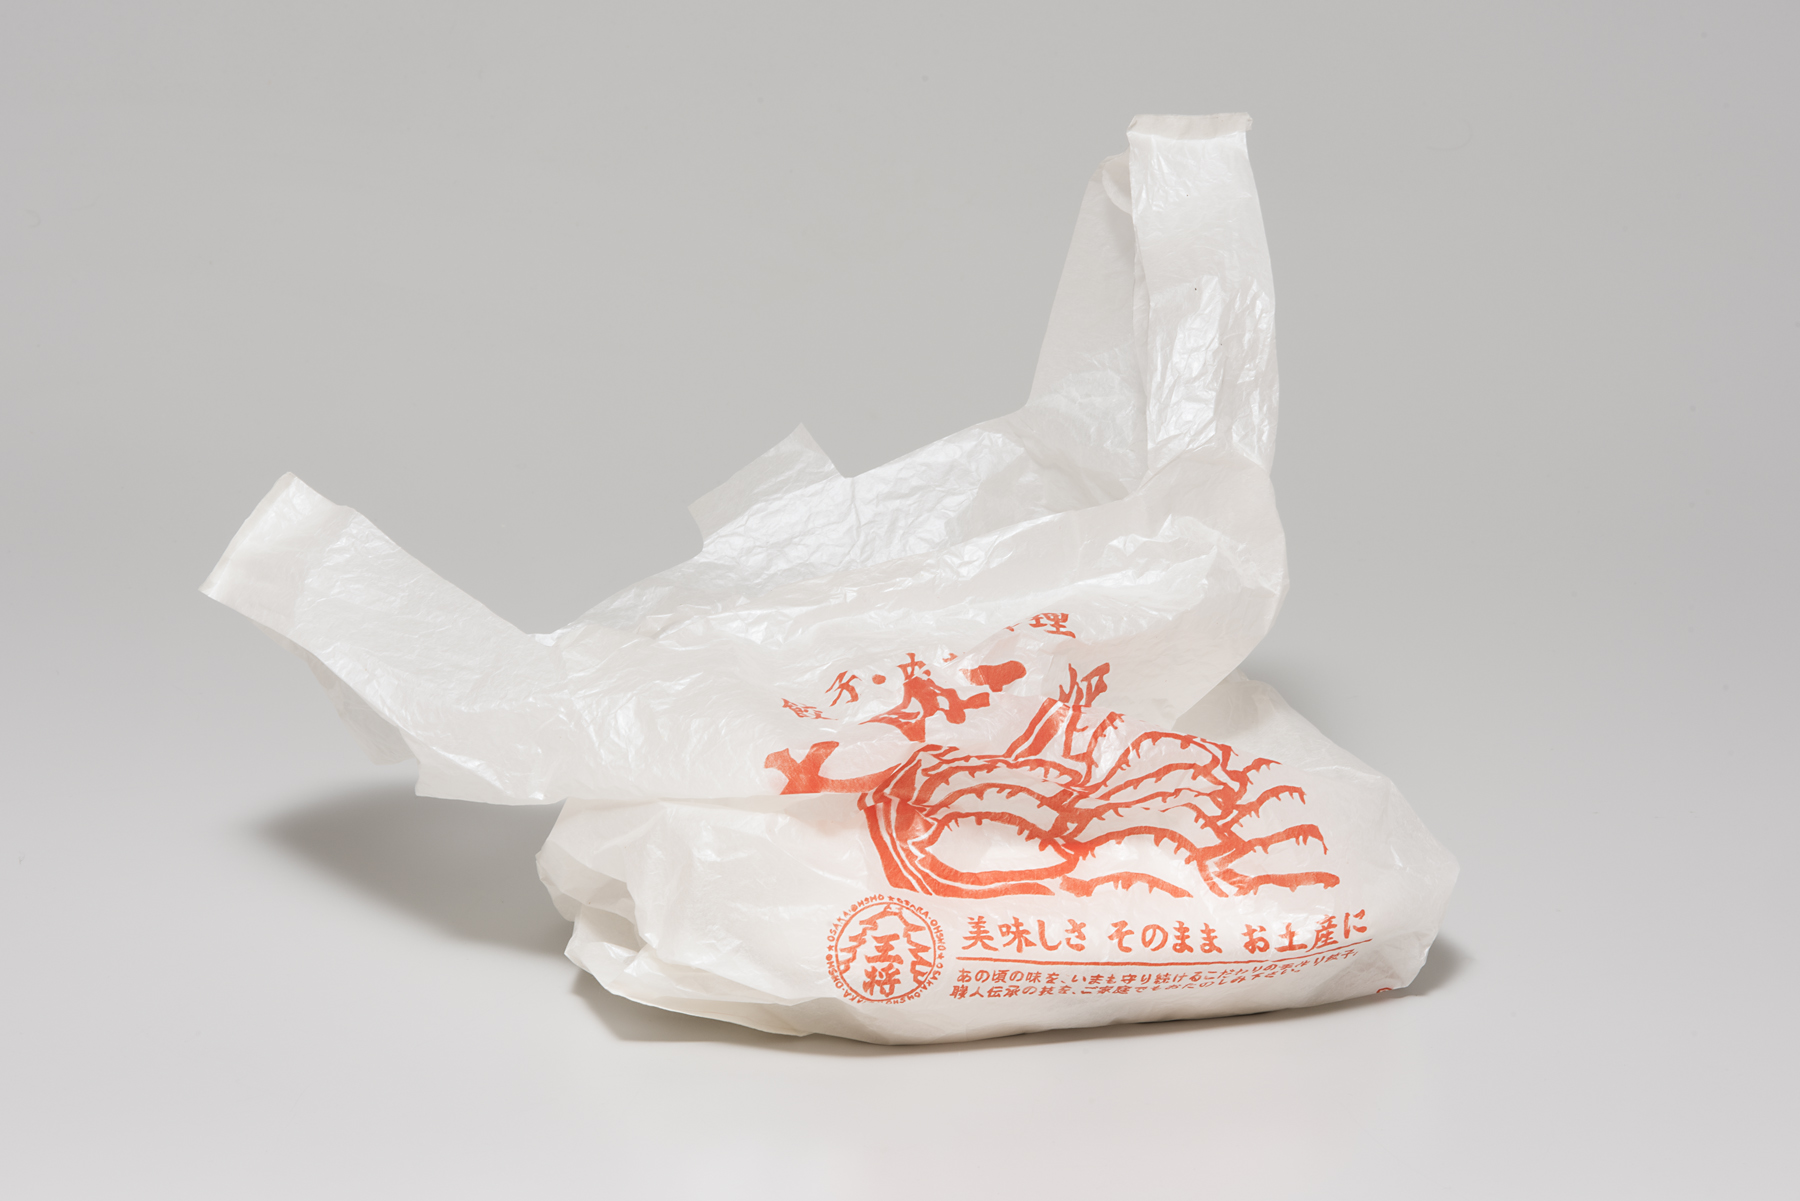 This porcelain piece is constructed to look identical to a white plastic bag. The bag is slightly crumpled and holds a porcelain version of a Styrofoam takeout container. The front of the white bag has red text in Japanese and the logo of Osaka Ohsho, the restaurant this piece is modeled after.